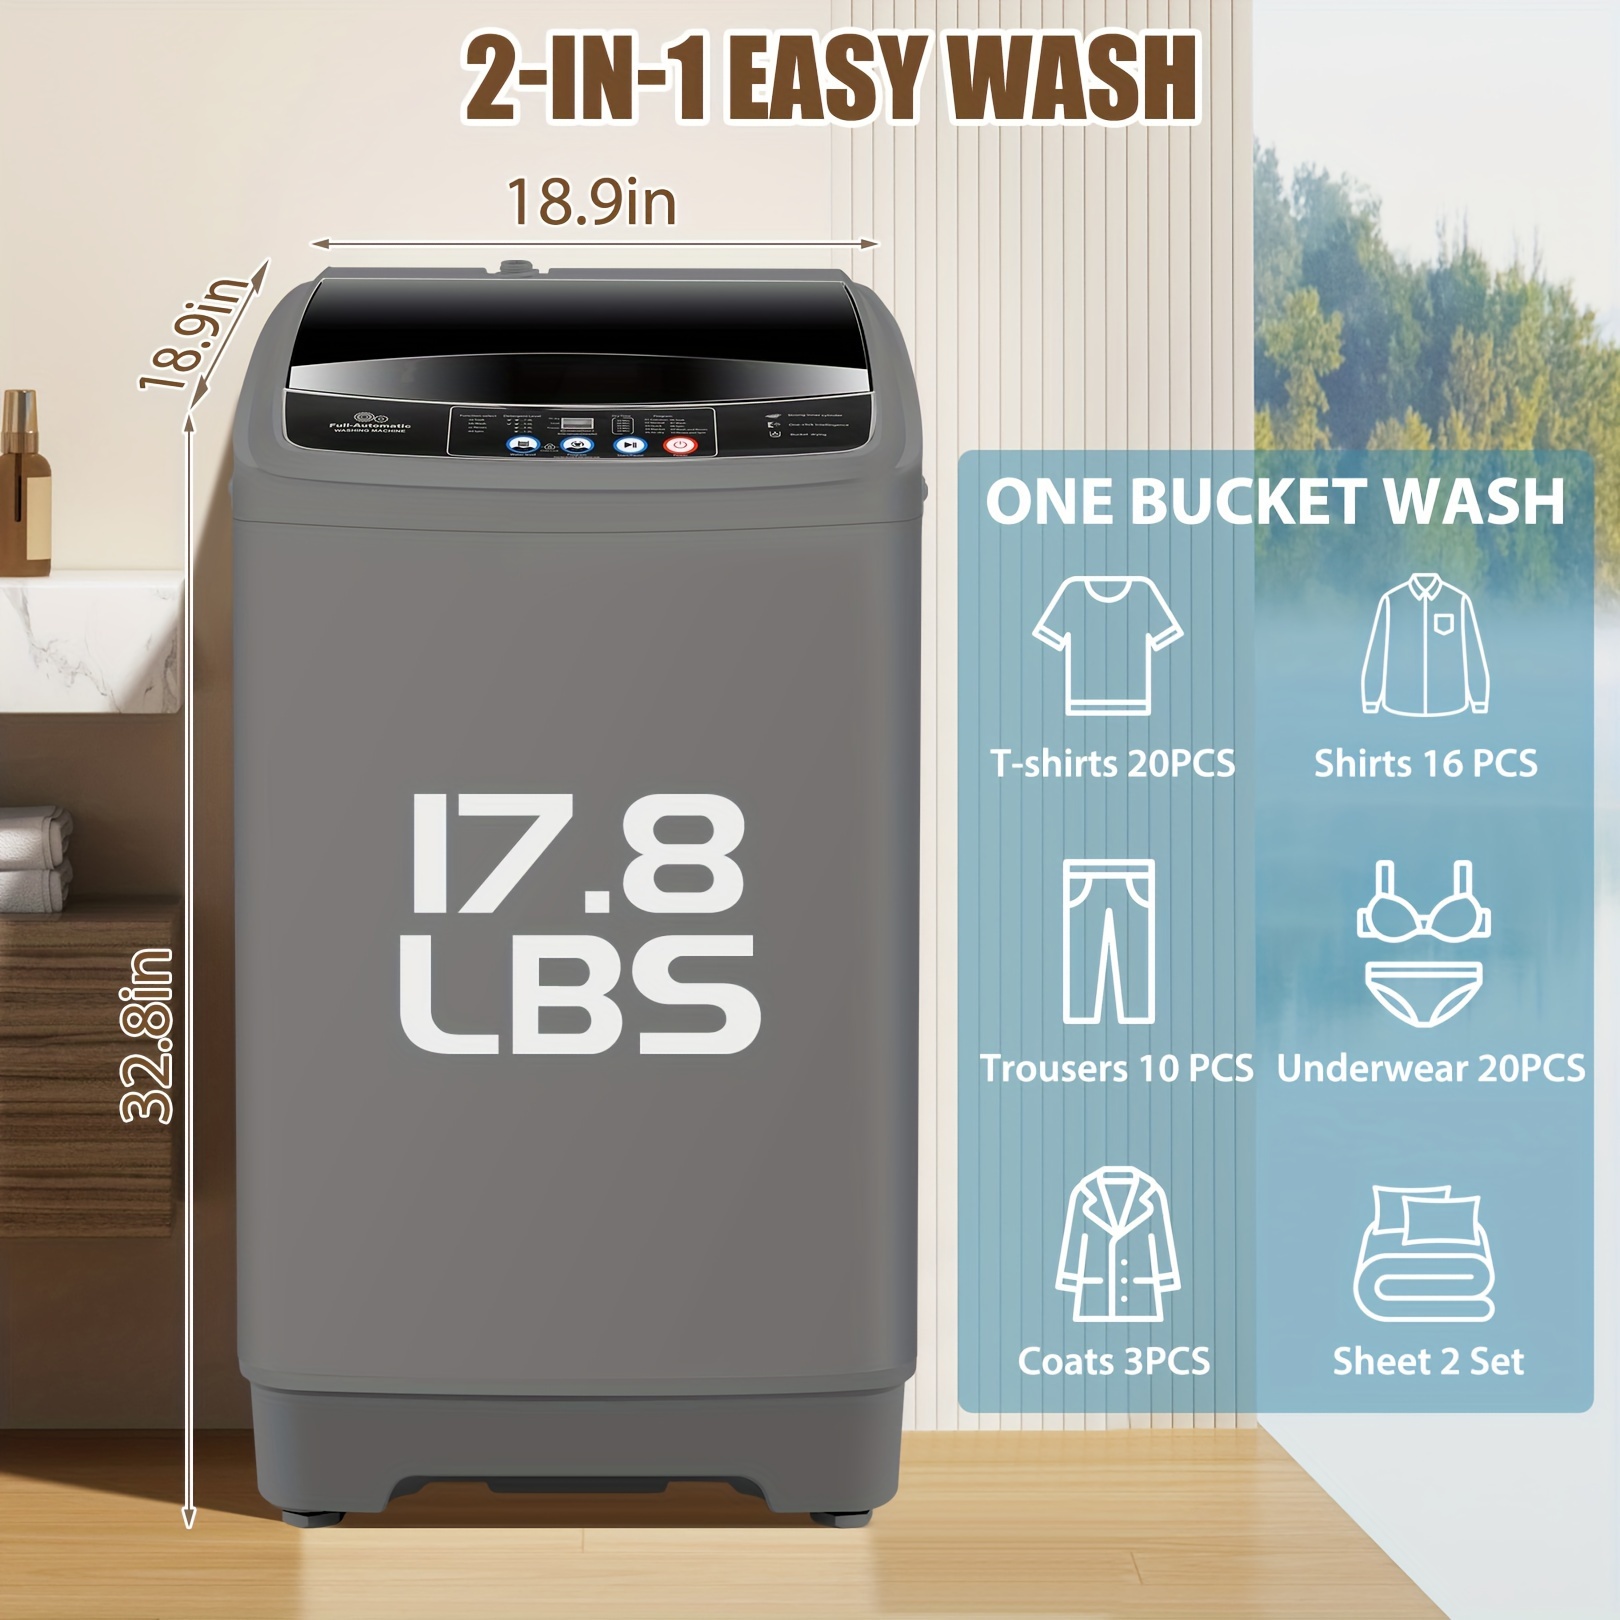 

17.8lbs Large Capacity, Full Automatic Washing Machine With 10 Programs And 8 Water Levels Selections, Led Display, Low Noise, Small Washing Machine For Apartment, Home, Dorms